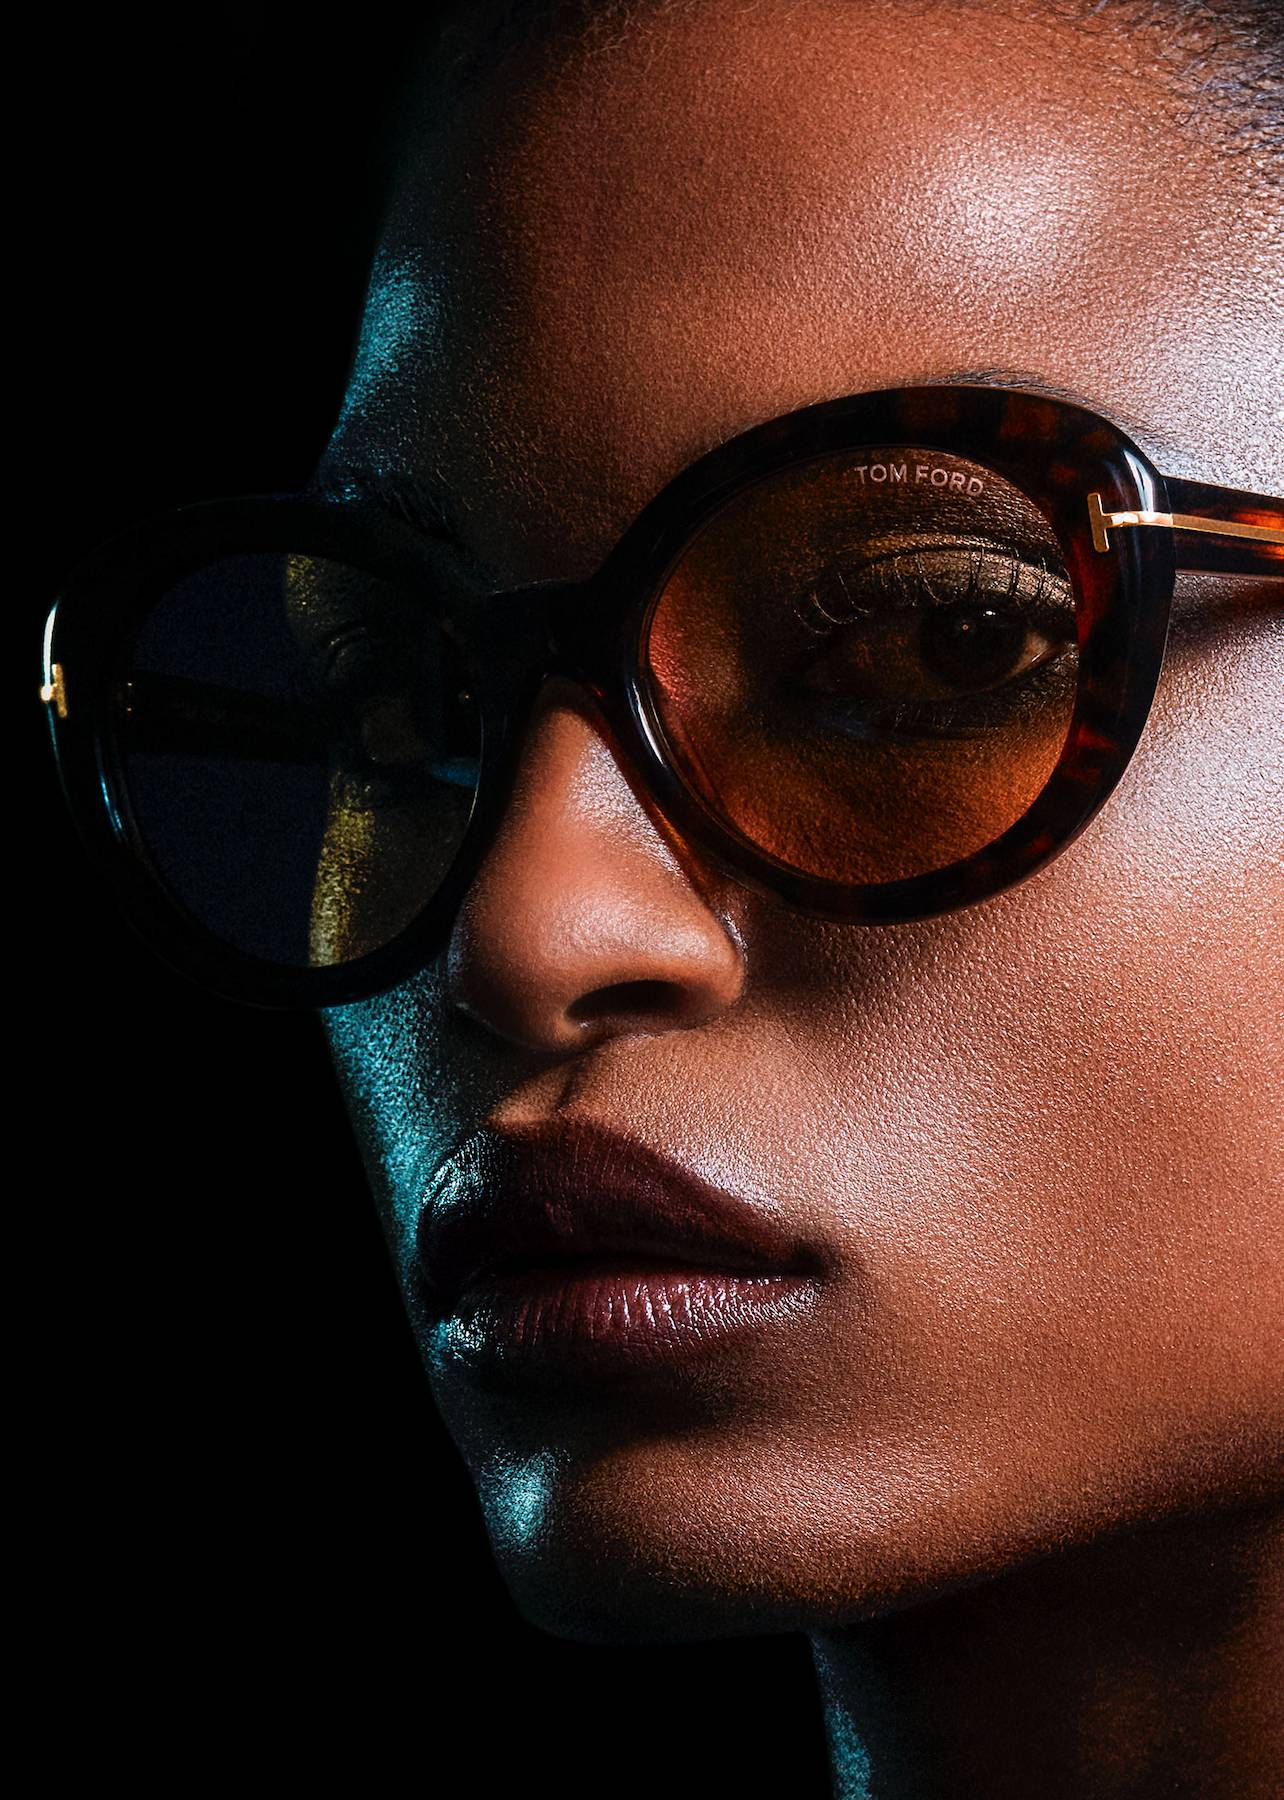 TOM FORD EYEWEAR COLLECTION WITH PHOTOCHROMATIC LENSES: FUNCTIONALITY MEETS  FASHION - Numéro Netherlands